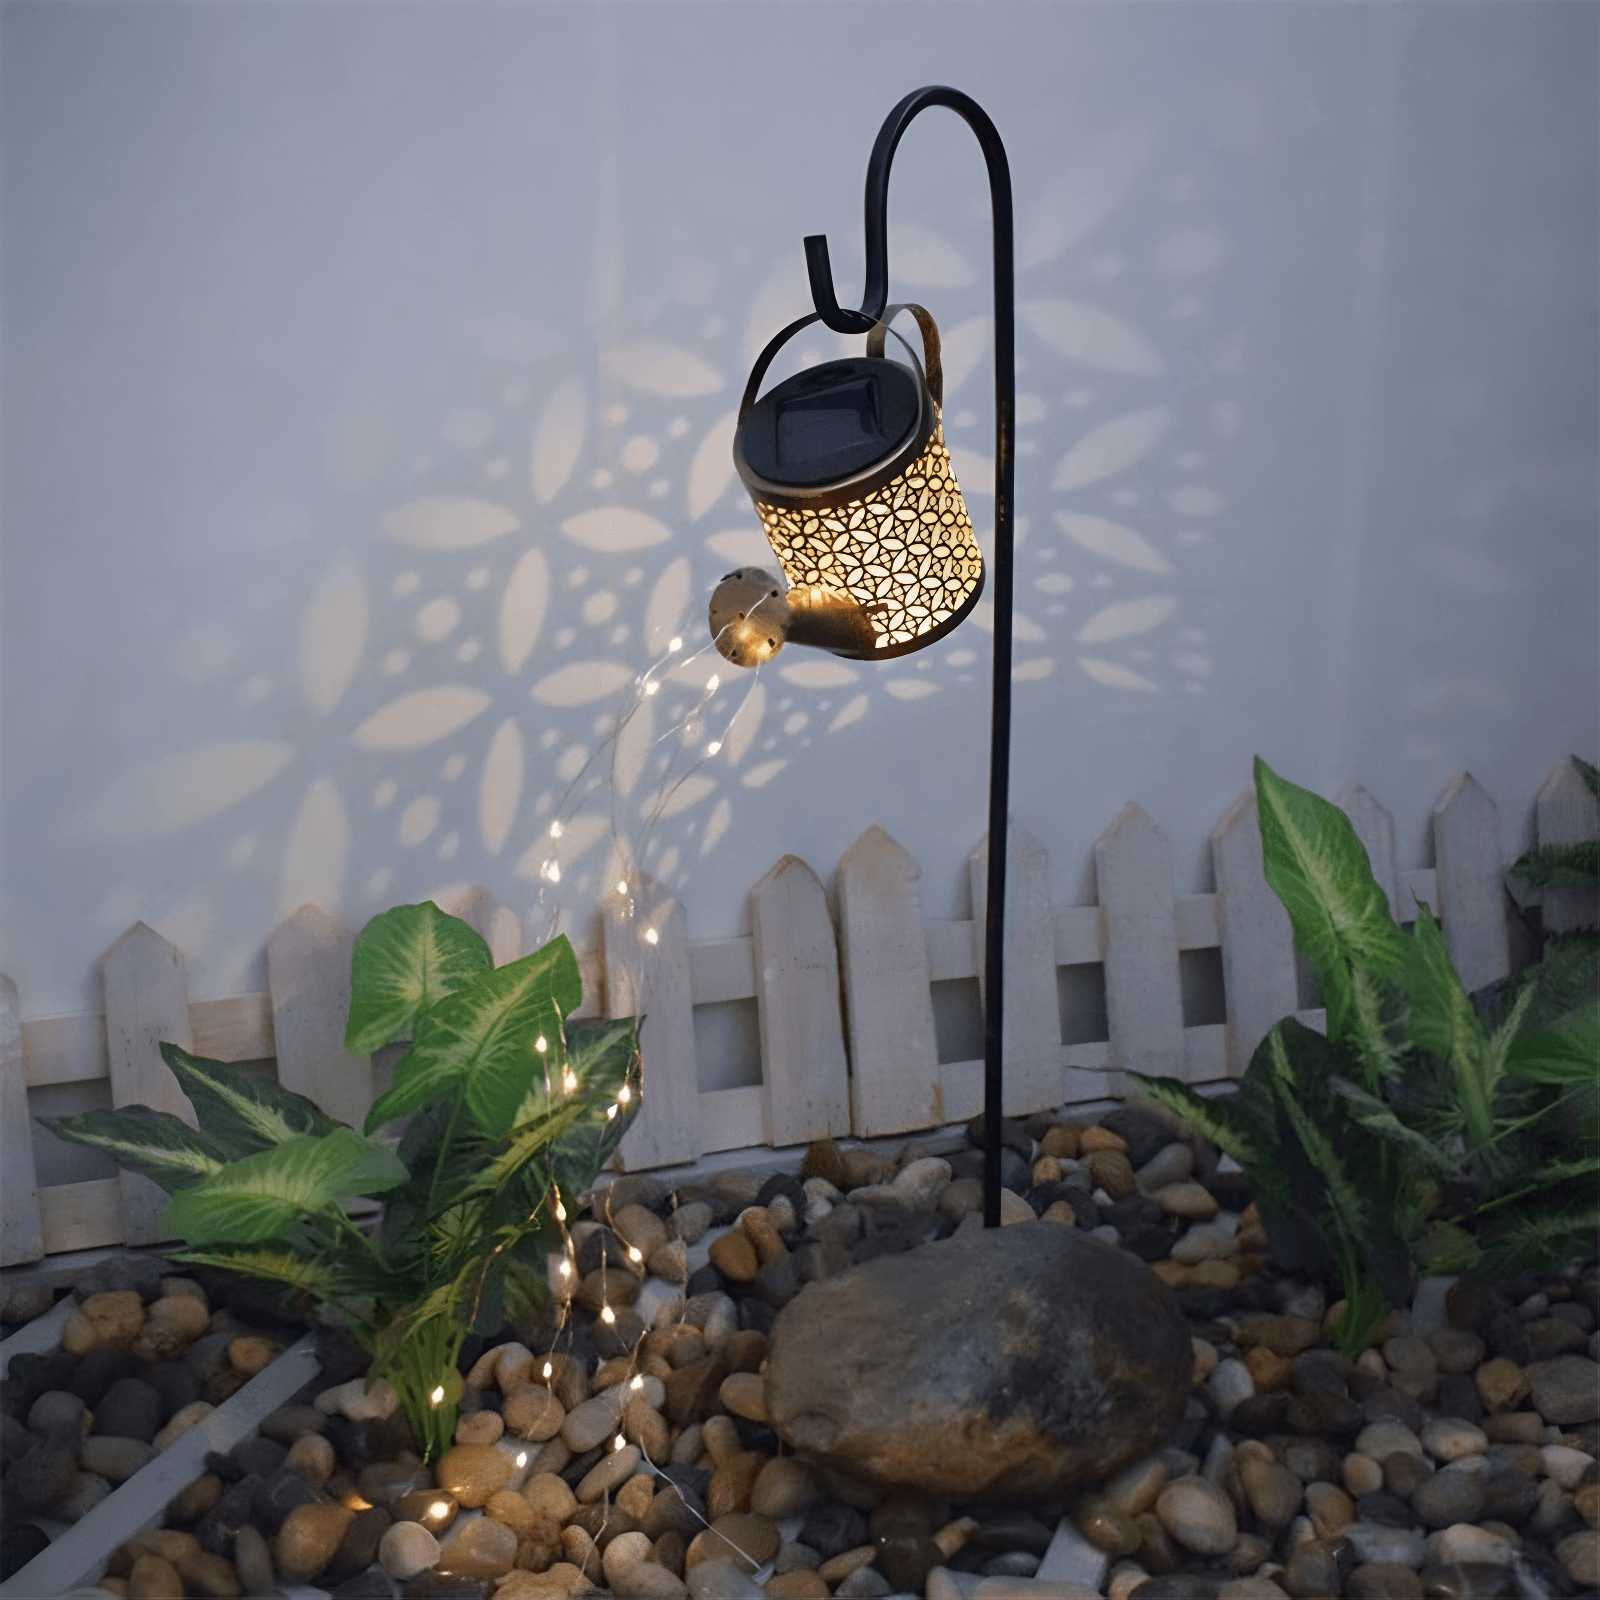  solar light watering can